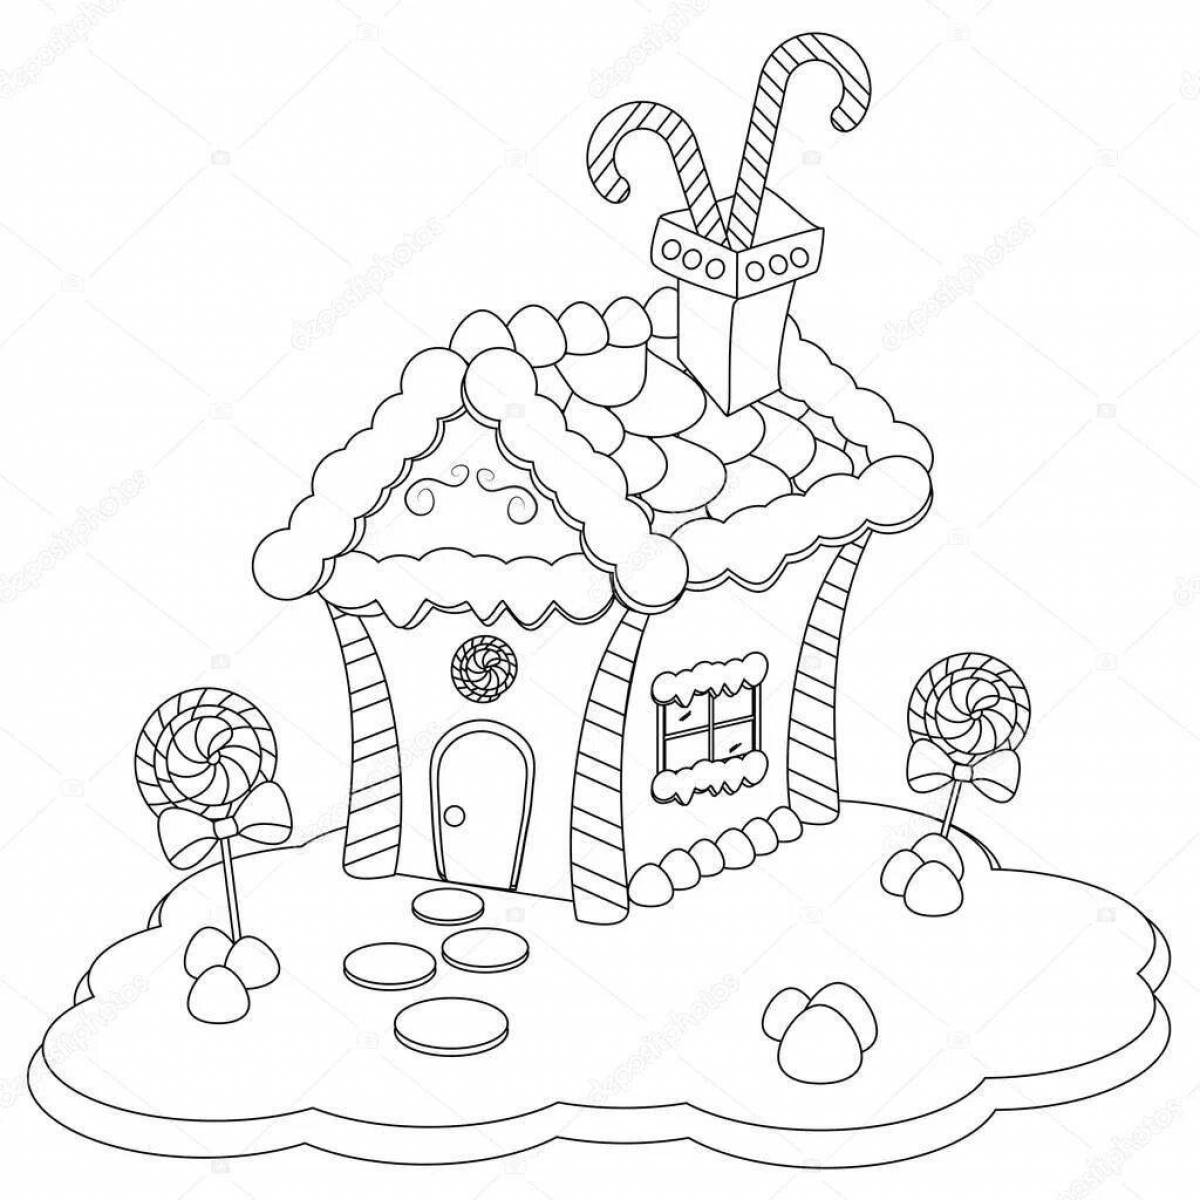 Dreamy gingerbread house coloring book